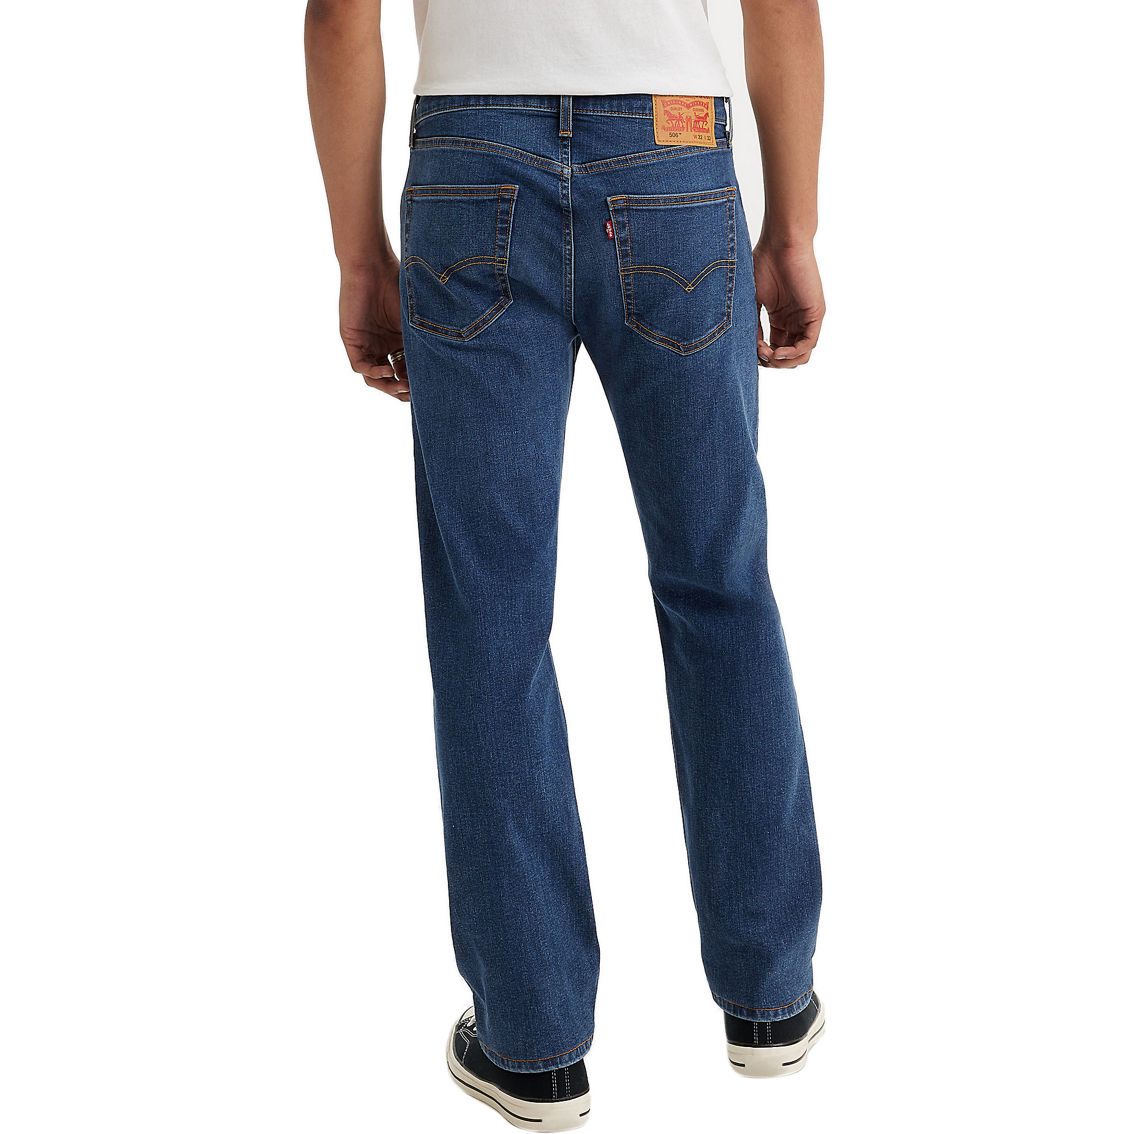 Levi's 506 Straight Fit Jeans - Image 2 of 3